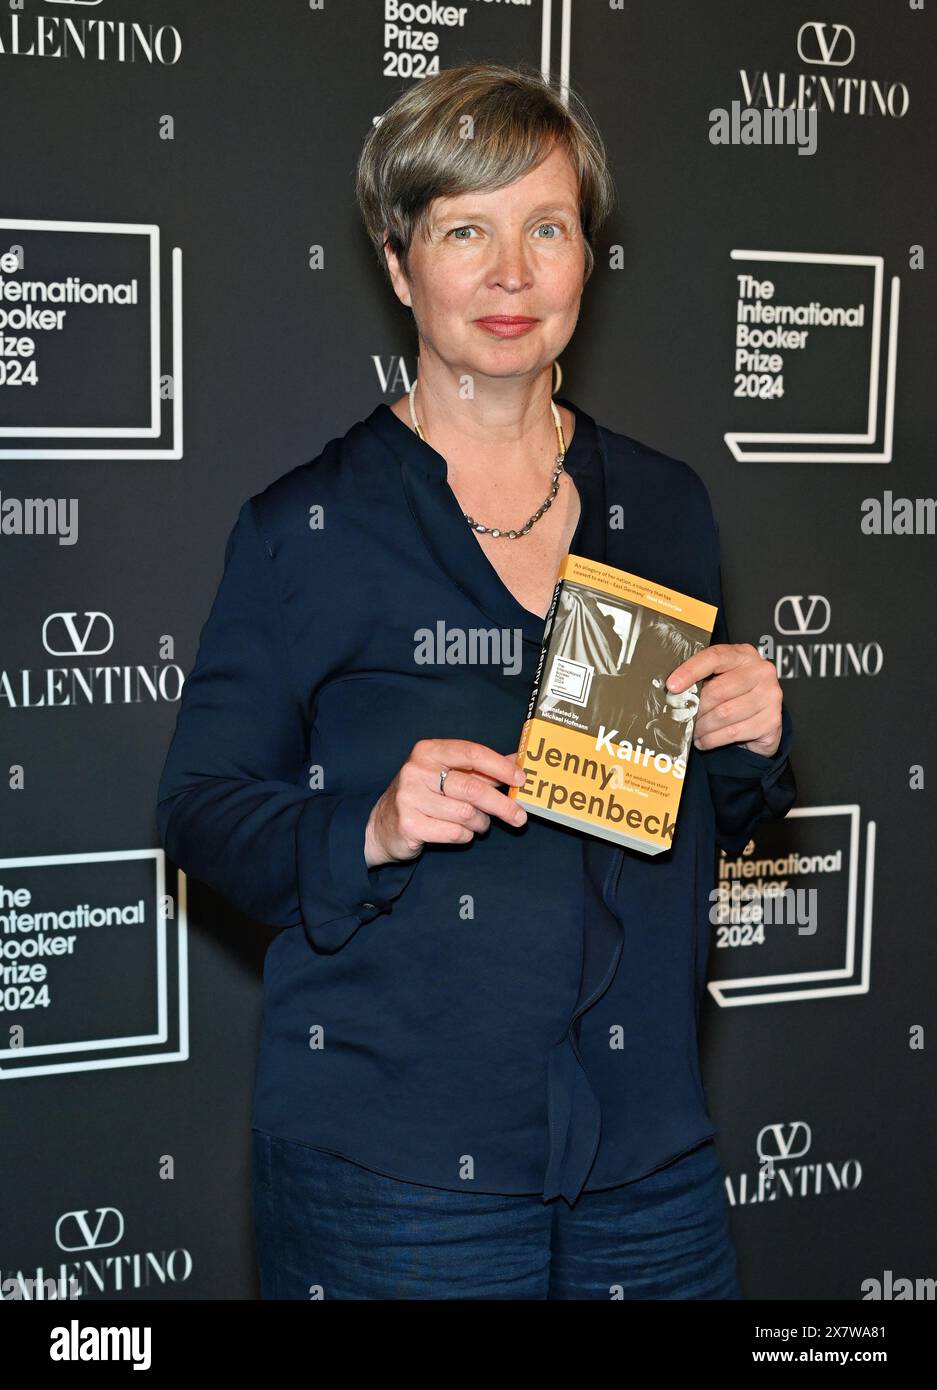 LONDON, ENGLAND - MAY 21 2024: Author Jenny Erpenbeck of the shortlisted book 'Kairos' attends The International Booker Prize 2024 announcement at Tate Modern in London, England. Credit: See Li/Picture Capital/Alamy Live News Stock Photo